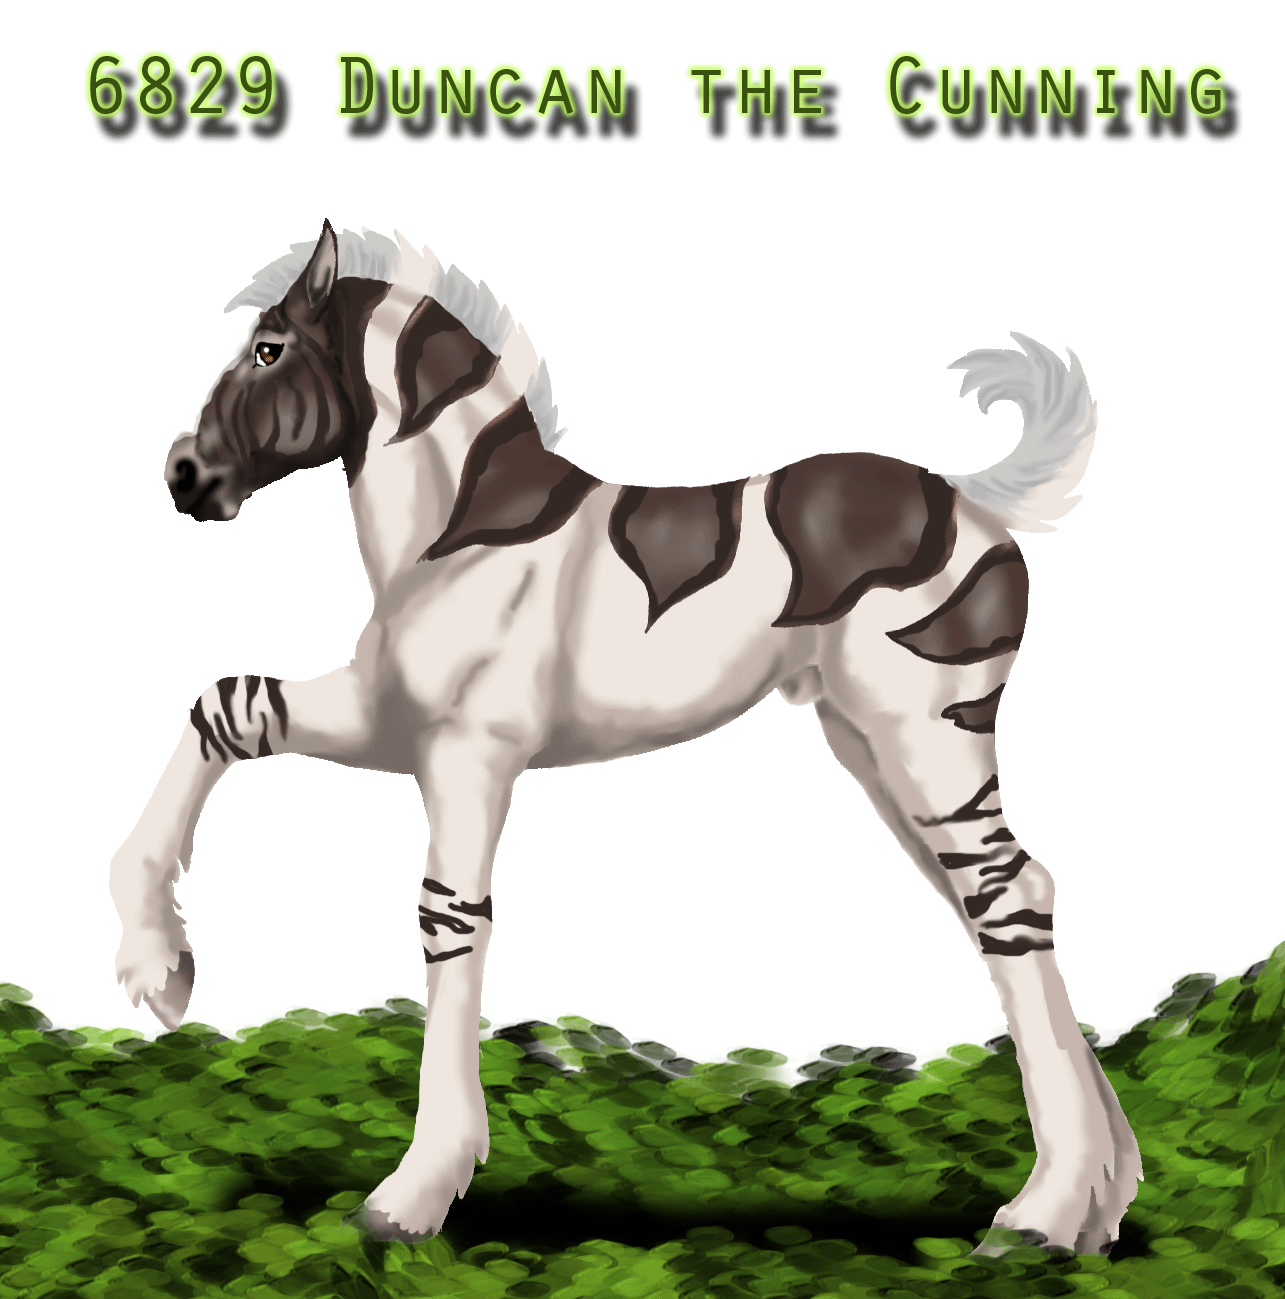 6829 Duncan the Cunning by Coplins